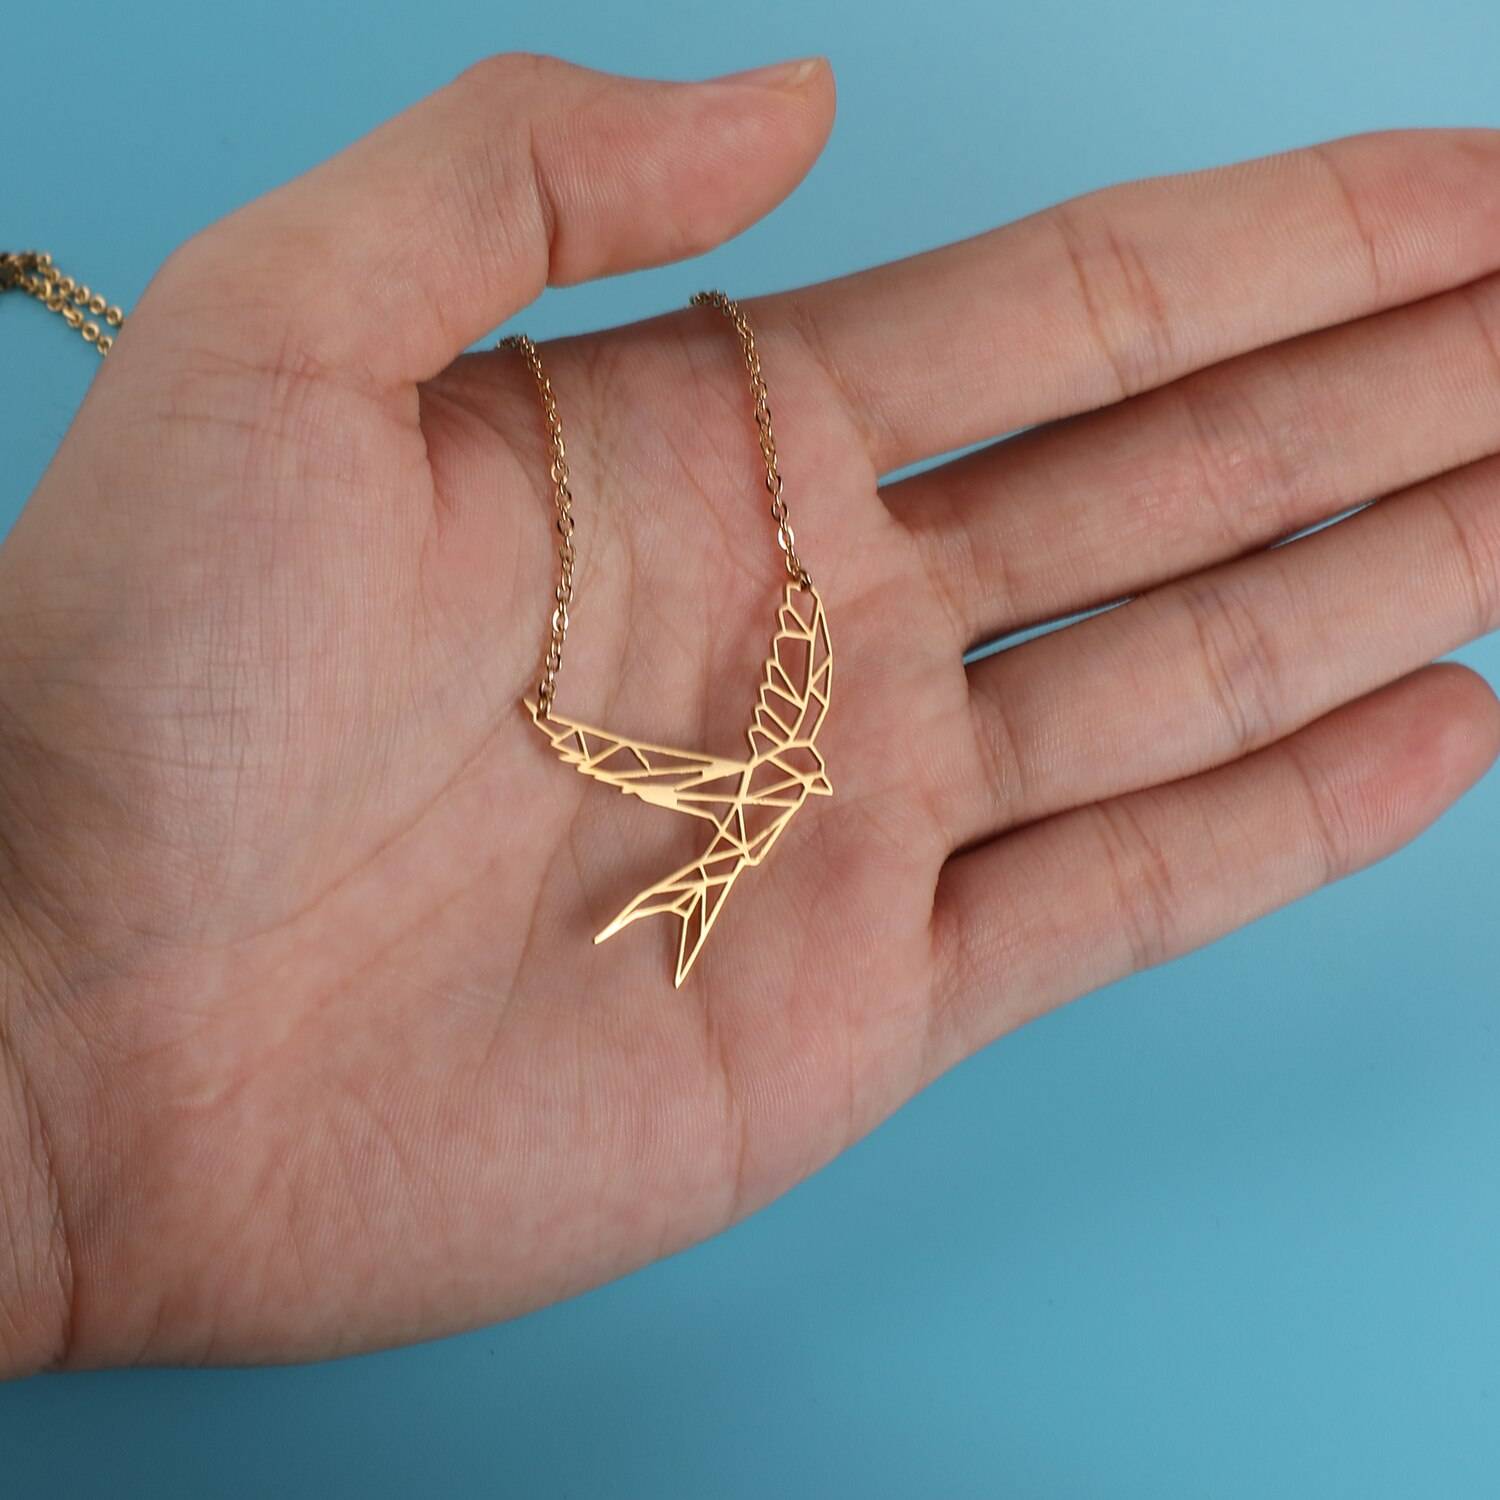 Soaring Seagull Origami Necklace in hand